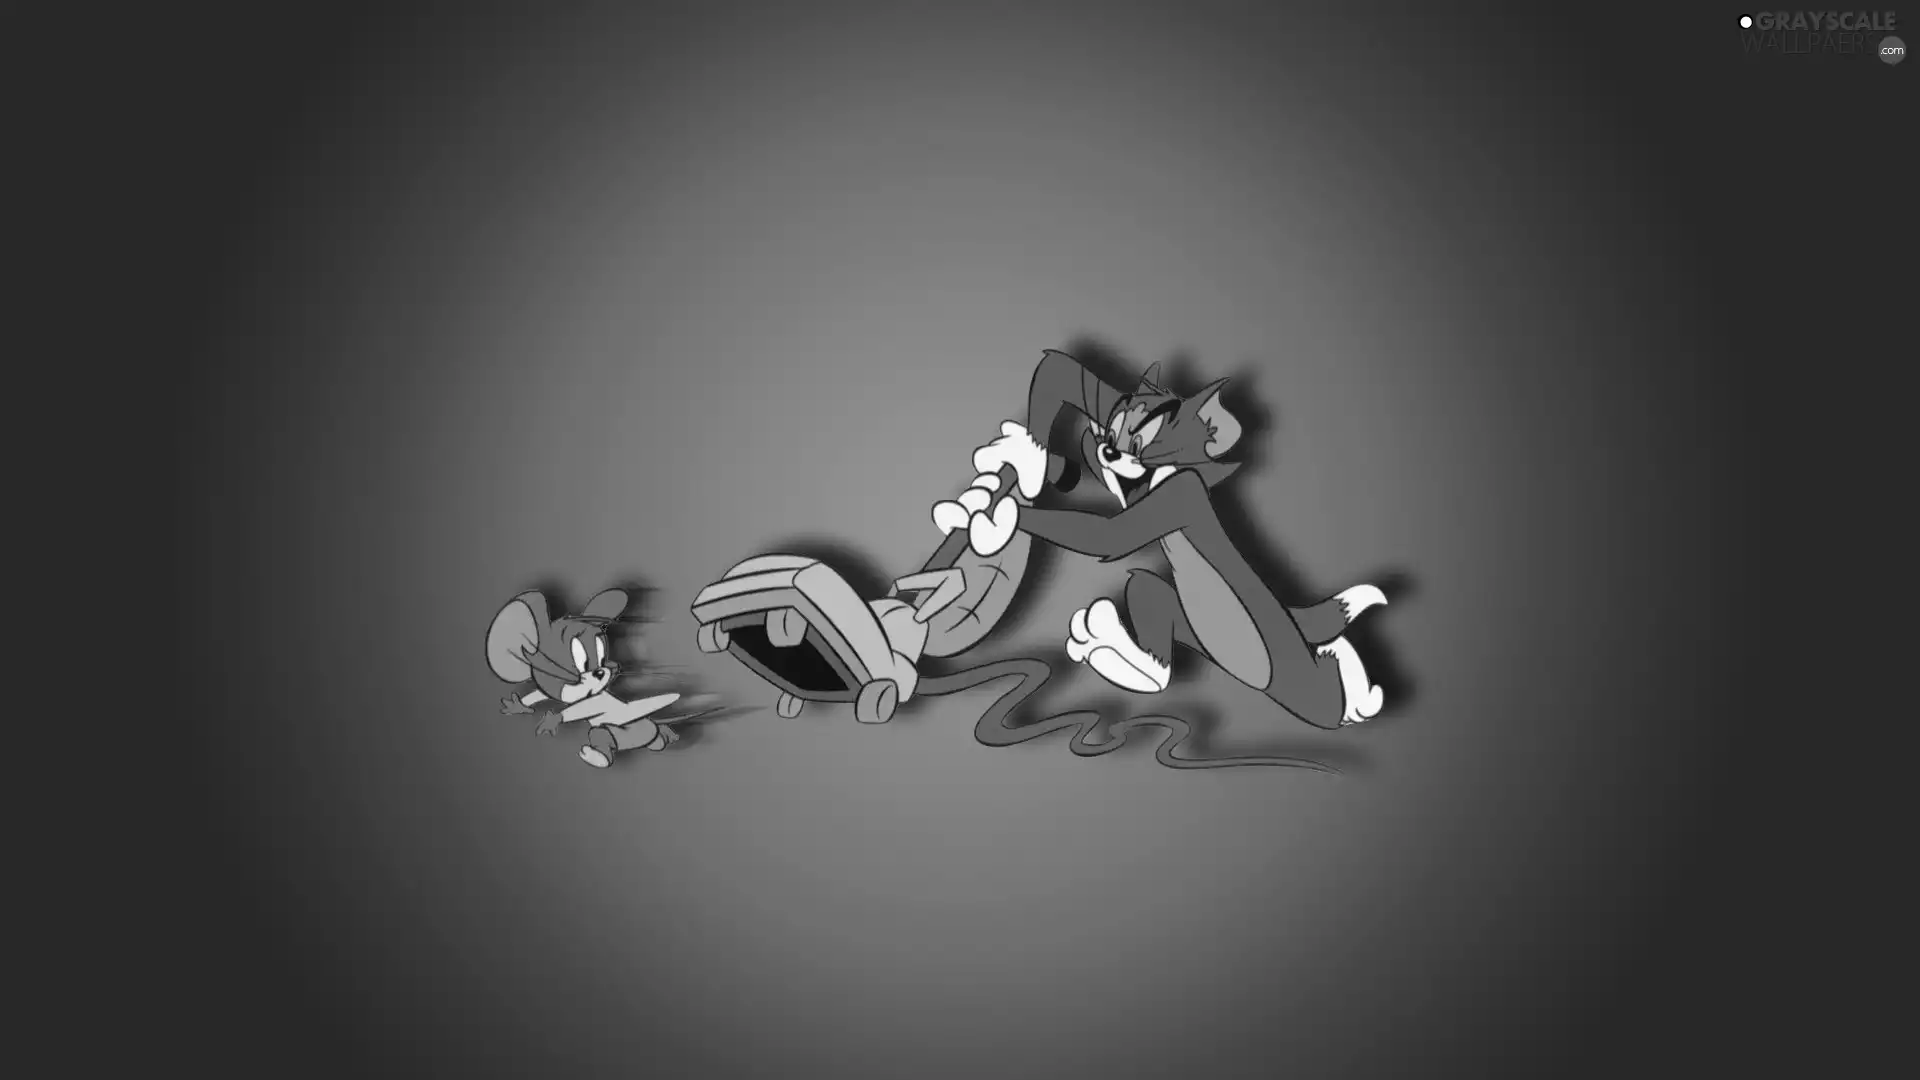 cleaner, Tom, Jerry